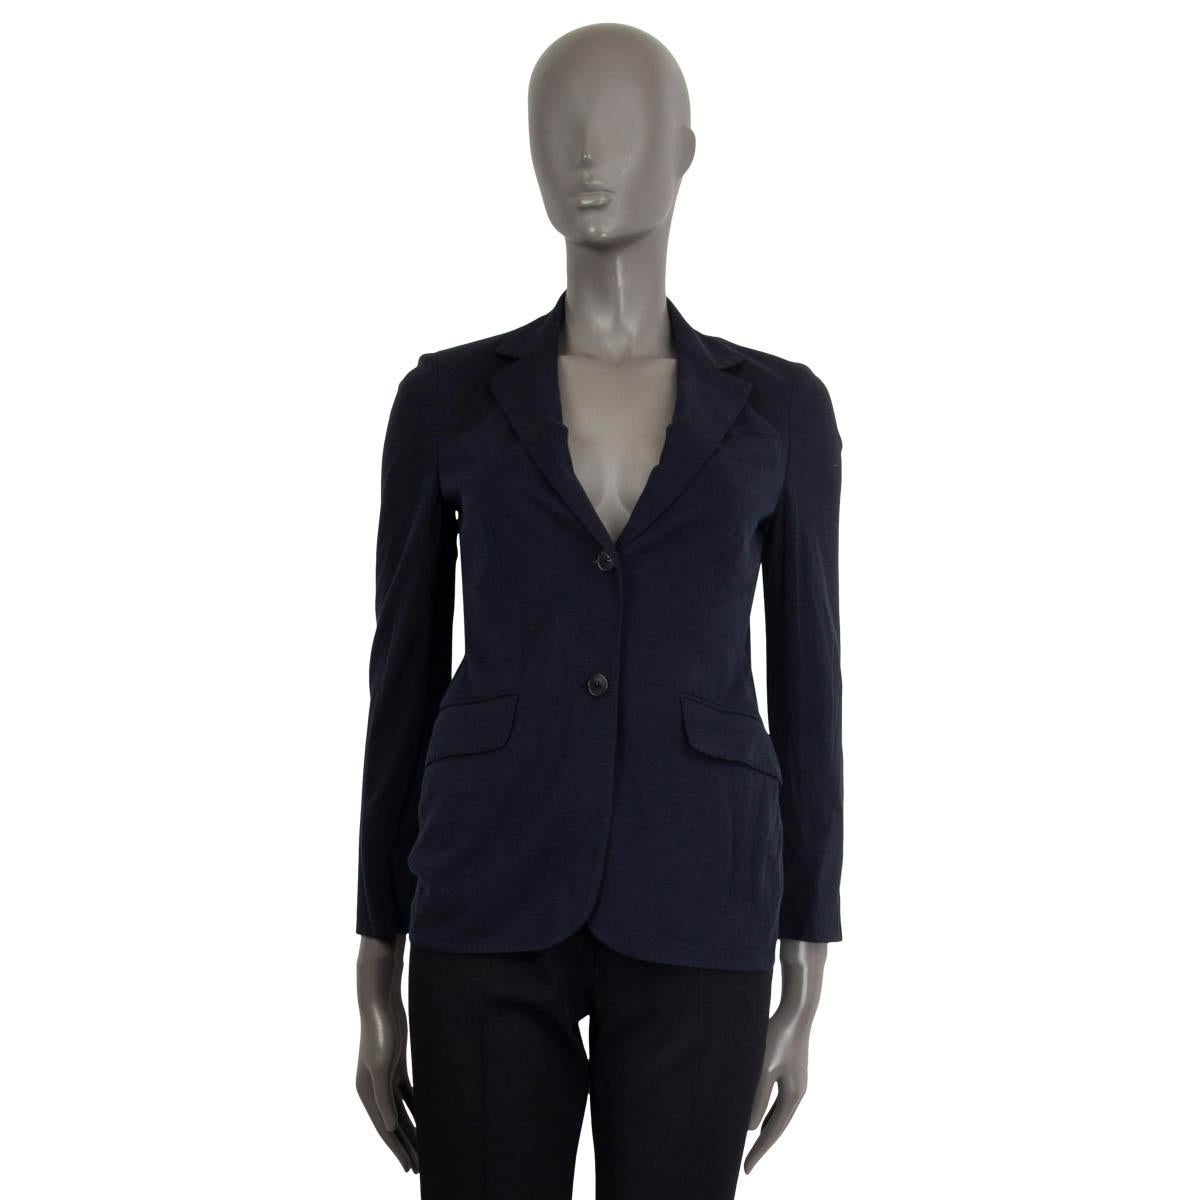 100% authentic Loro Piana blazer in midnight blue cotton (51%), silk (32%) and linen (16%). Comes with shoulder pads and three pockets on the front. Opens with two buttons on the front. Lined in silk (92%) and elastane (8%). Has been worn and is in